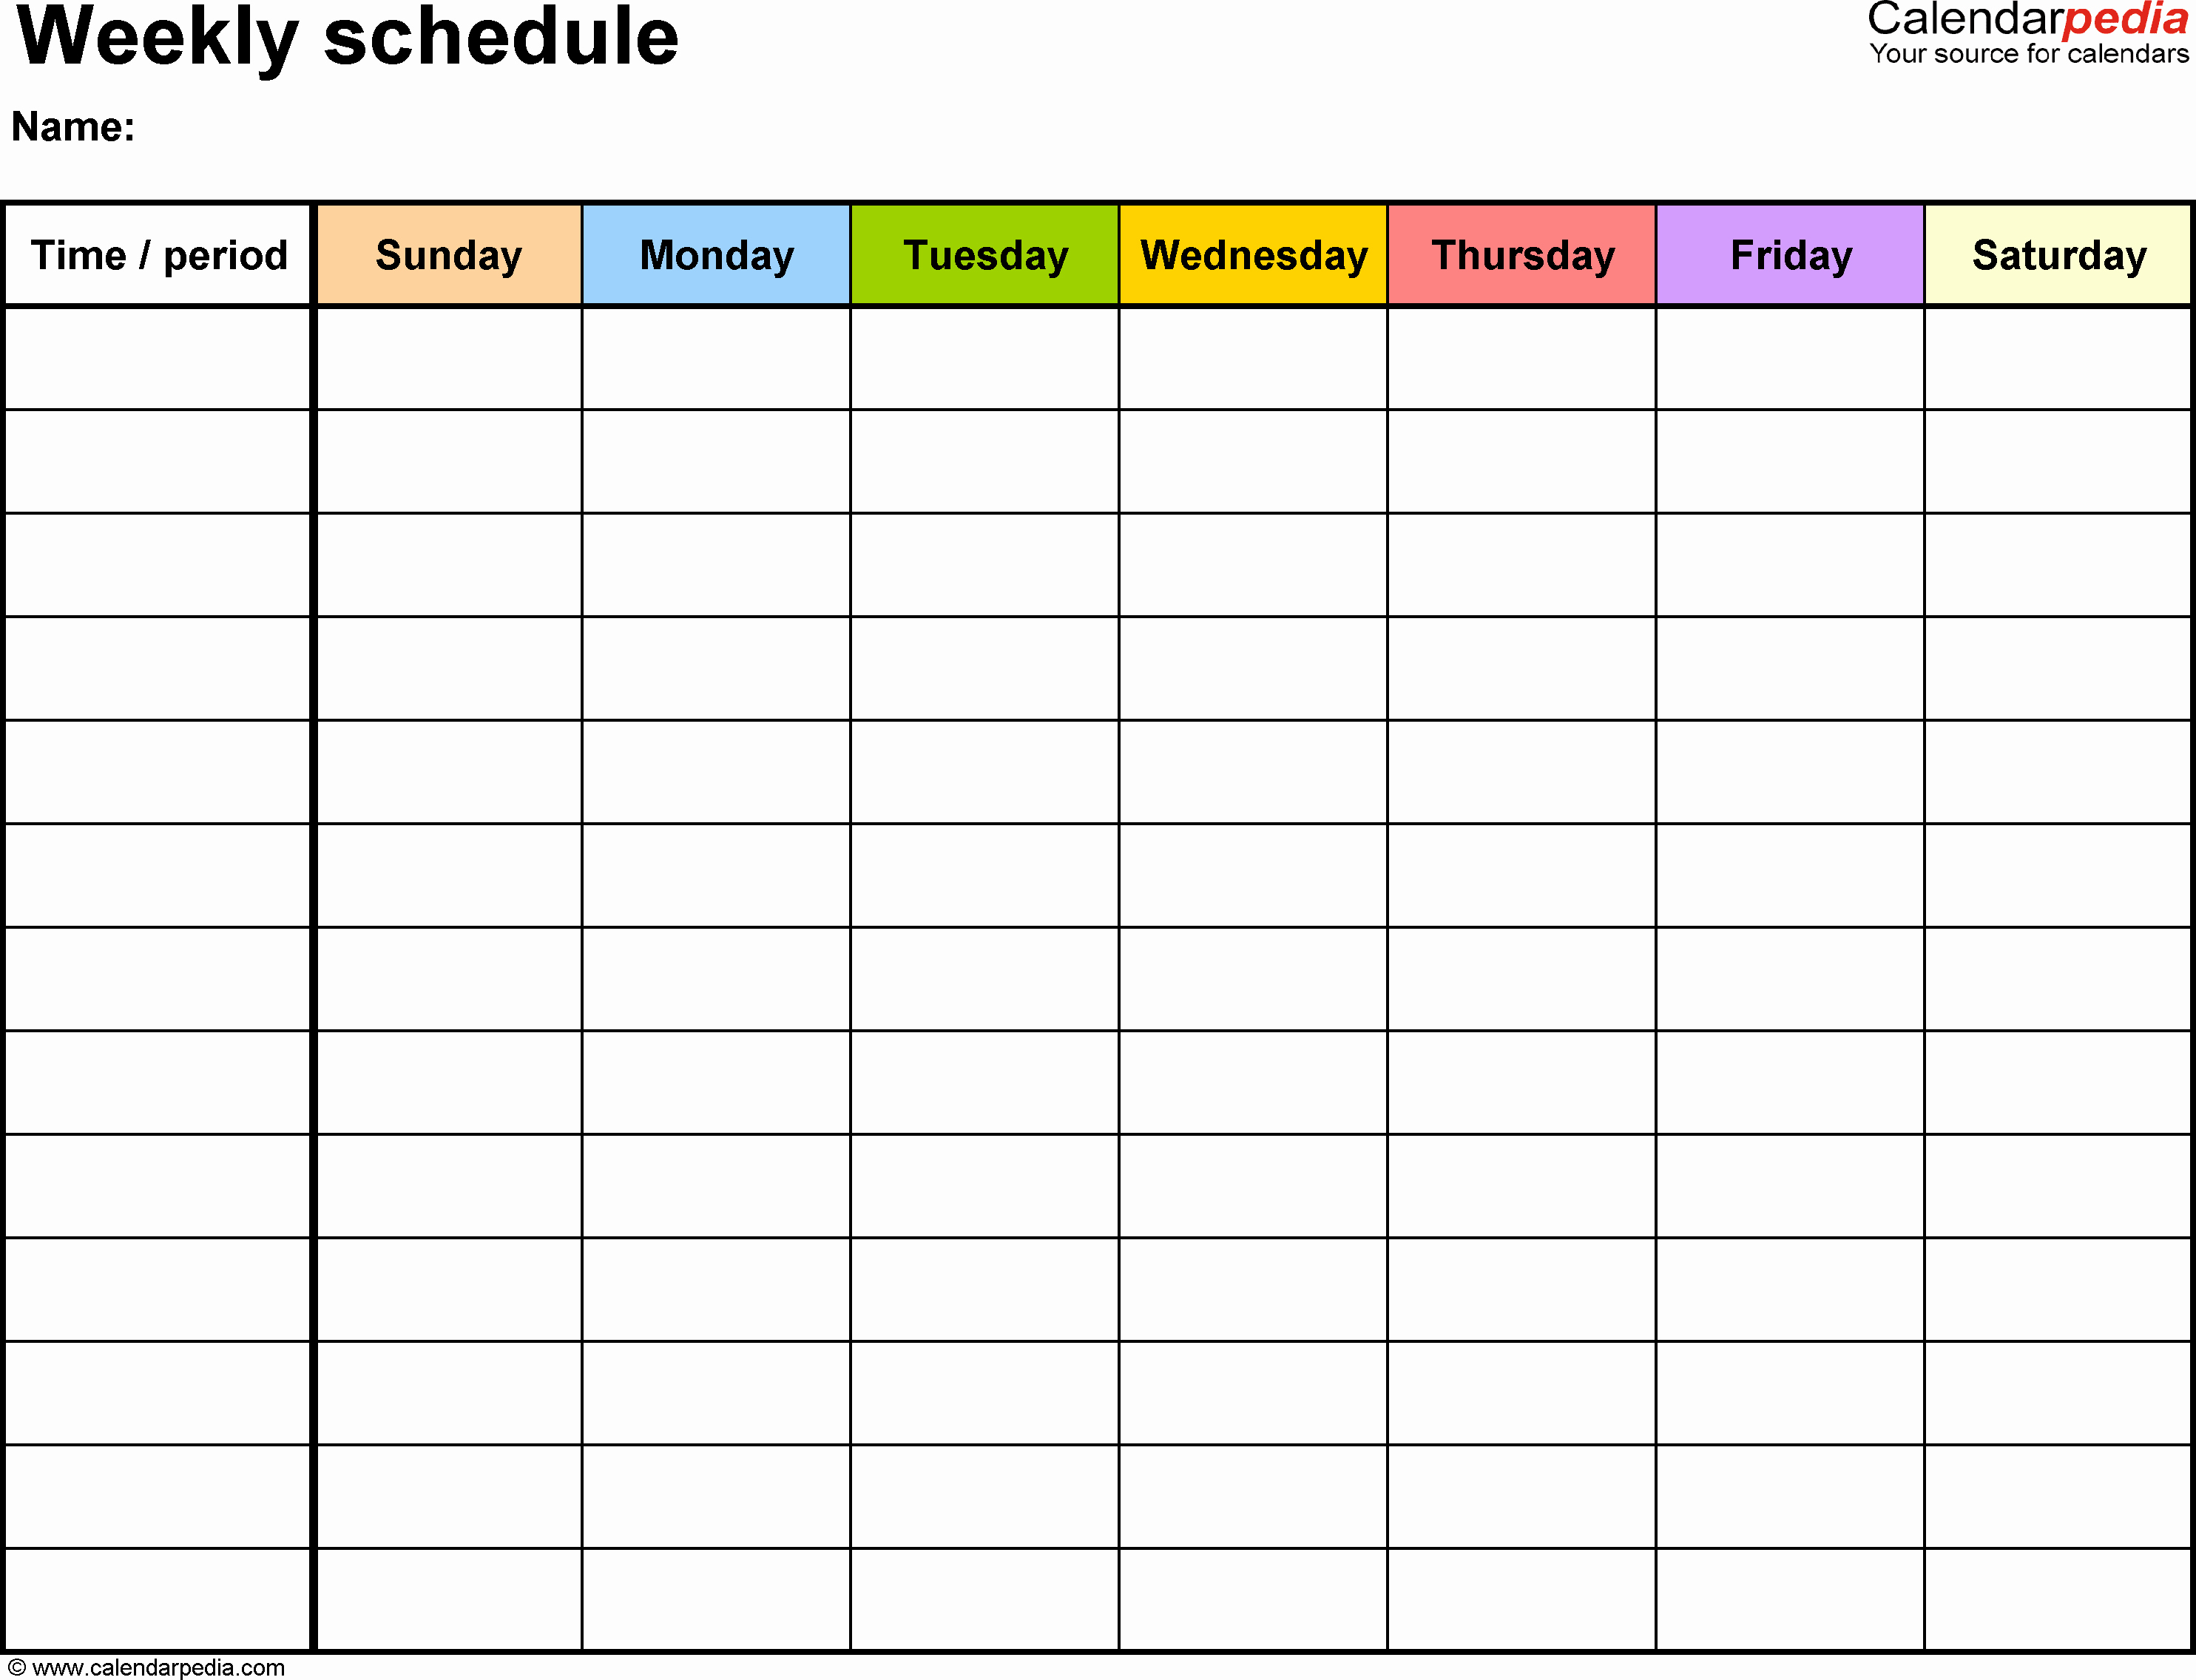 Weekly Work Schedule Template Pdf Awesome Free Weekly Schedule Templates for Pdf 18 Templates